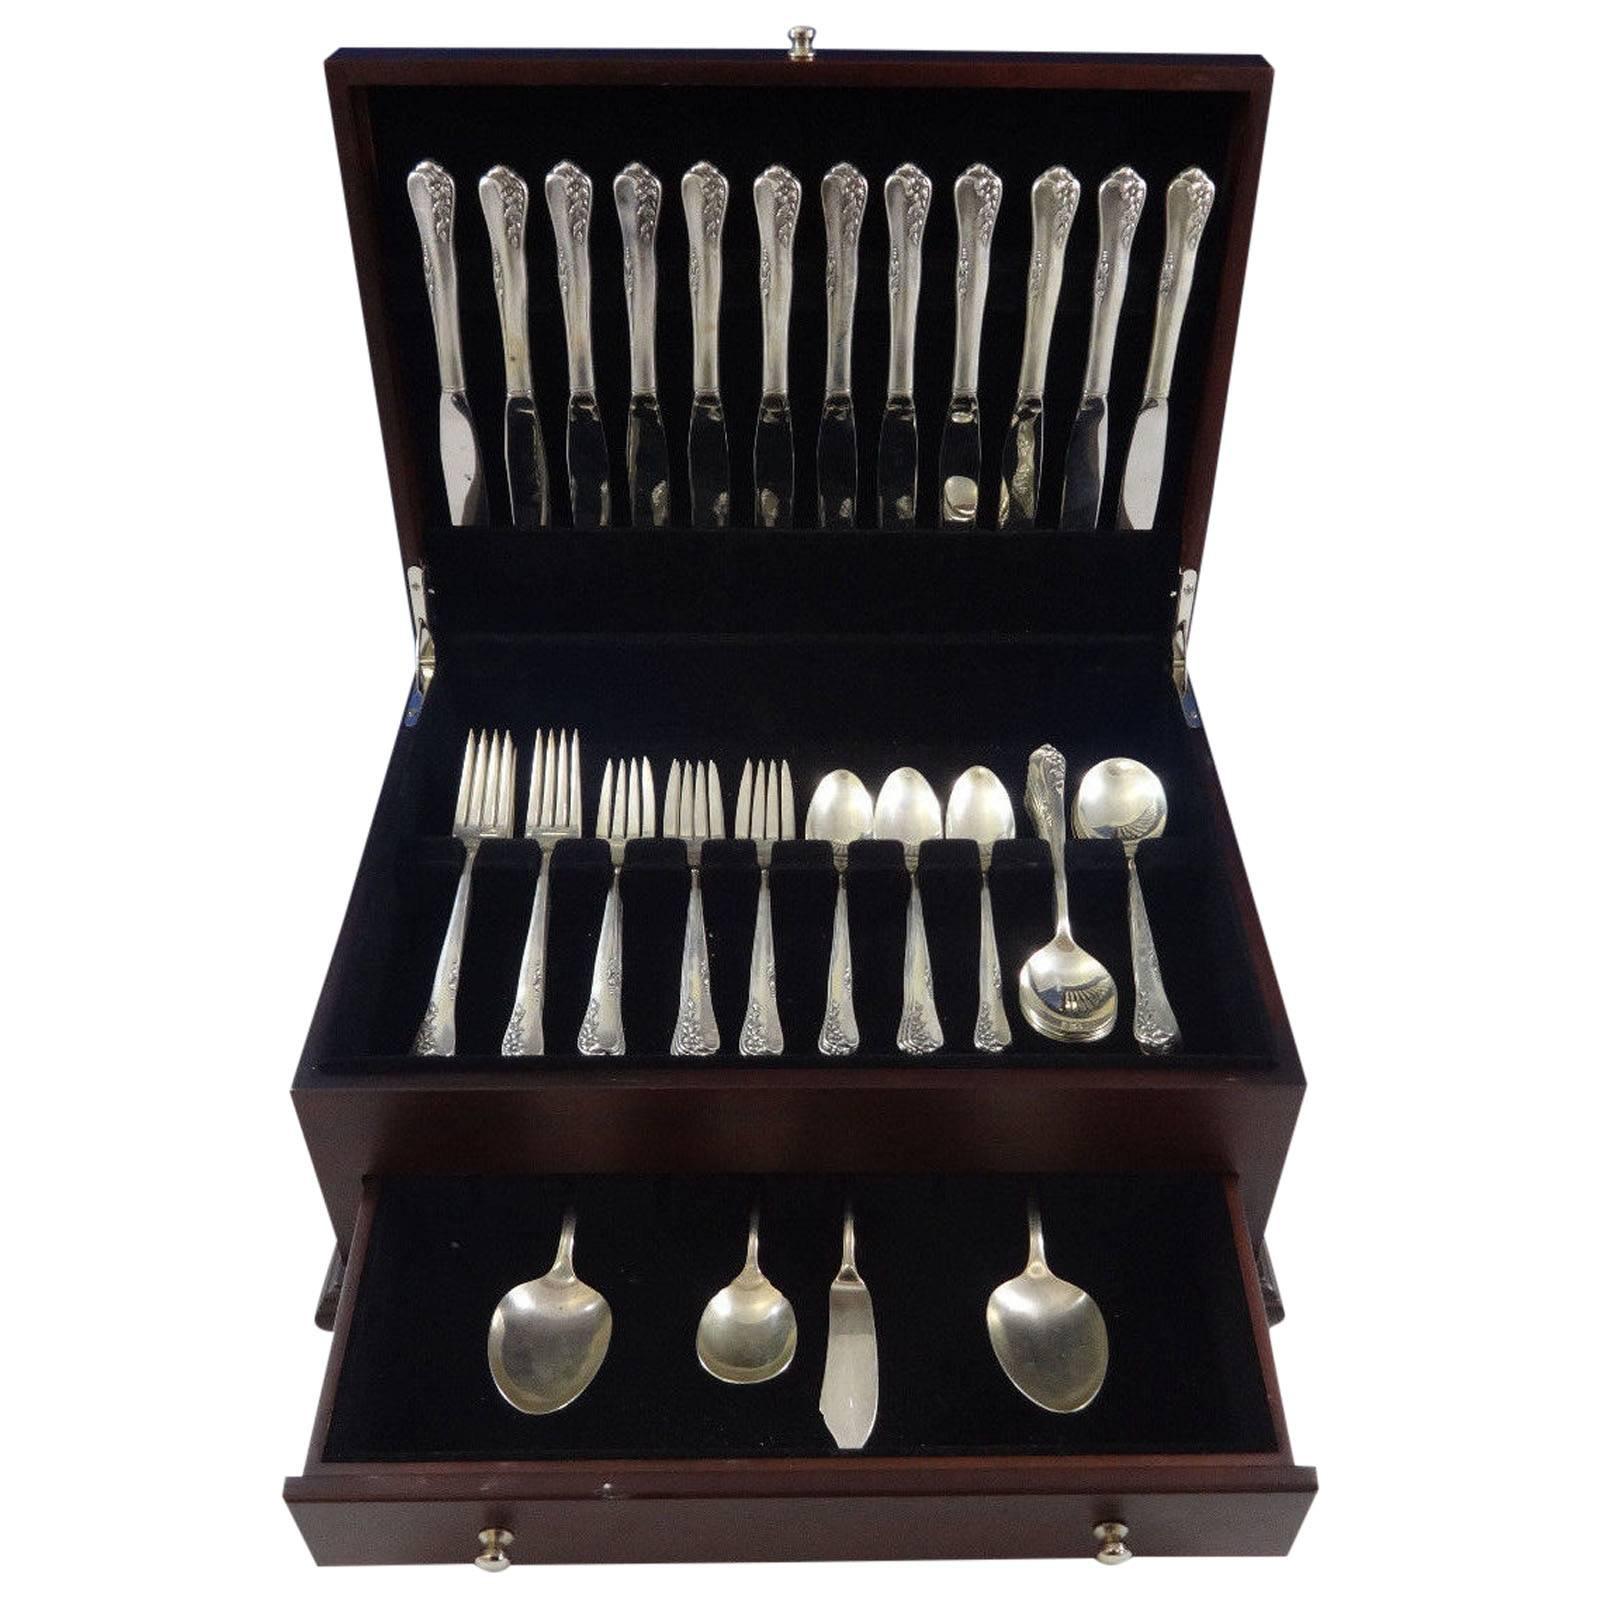 Engagement by Oneida sterling silver flatware set of 64 pieces. This set includes:

12 knives, 8 7/8